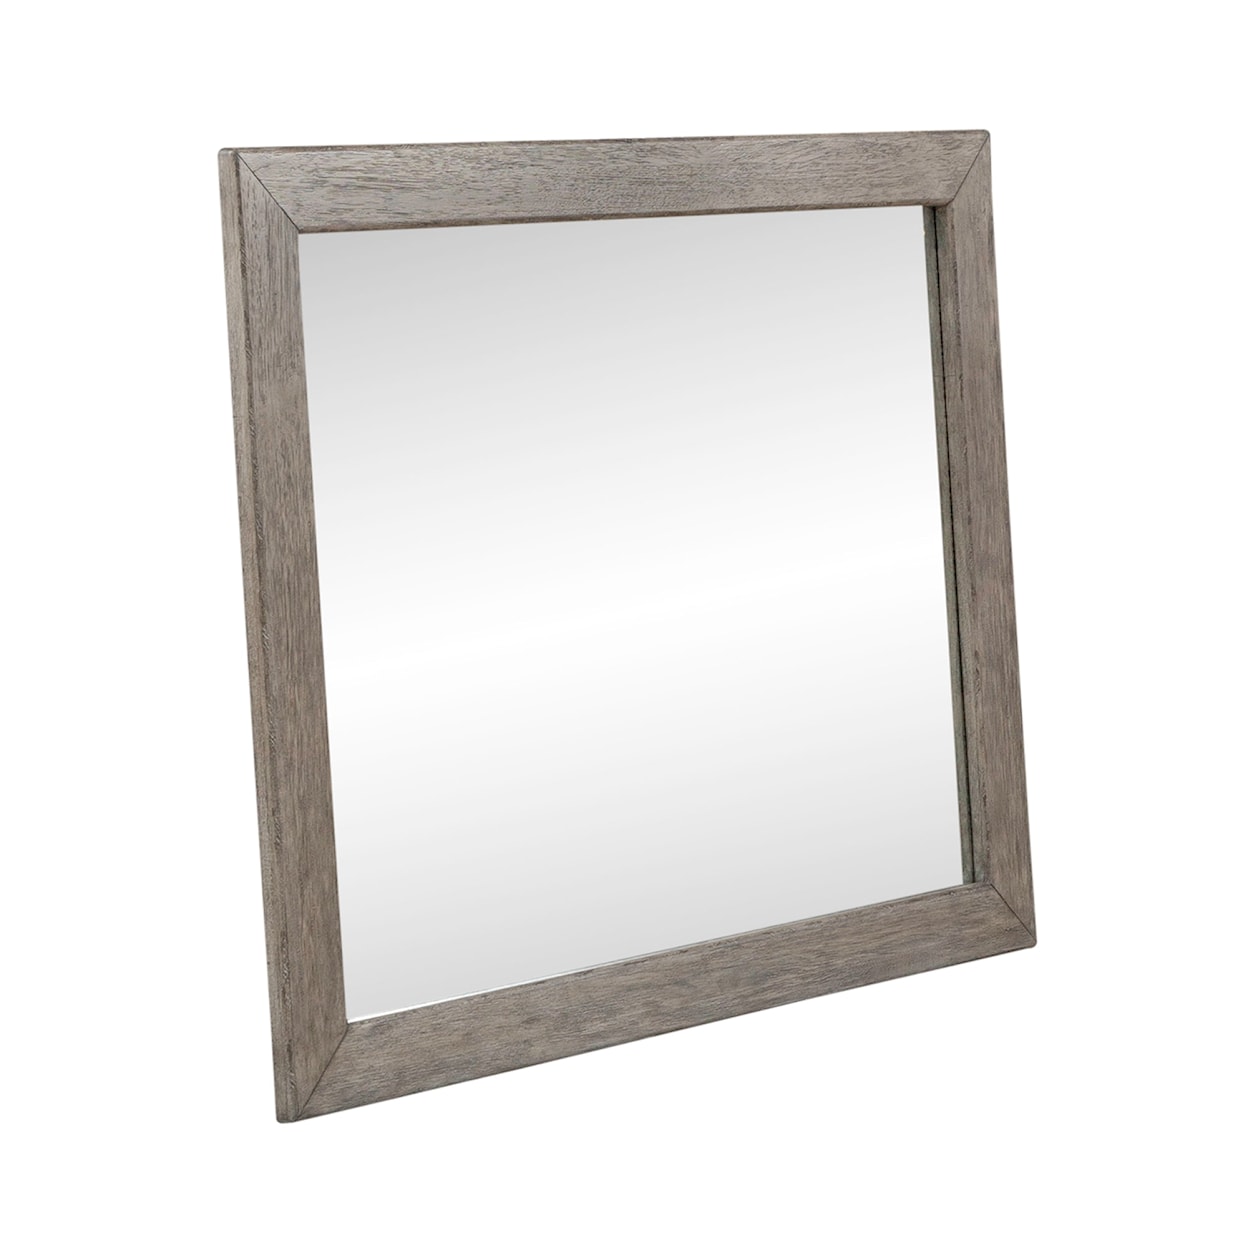 Libby Skyview Lodge Landscape Mirror